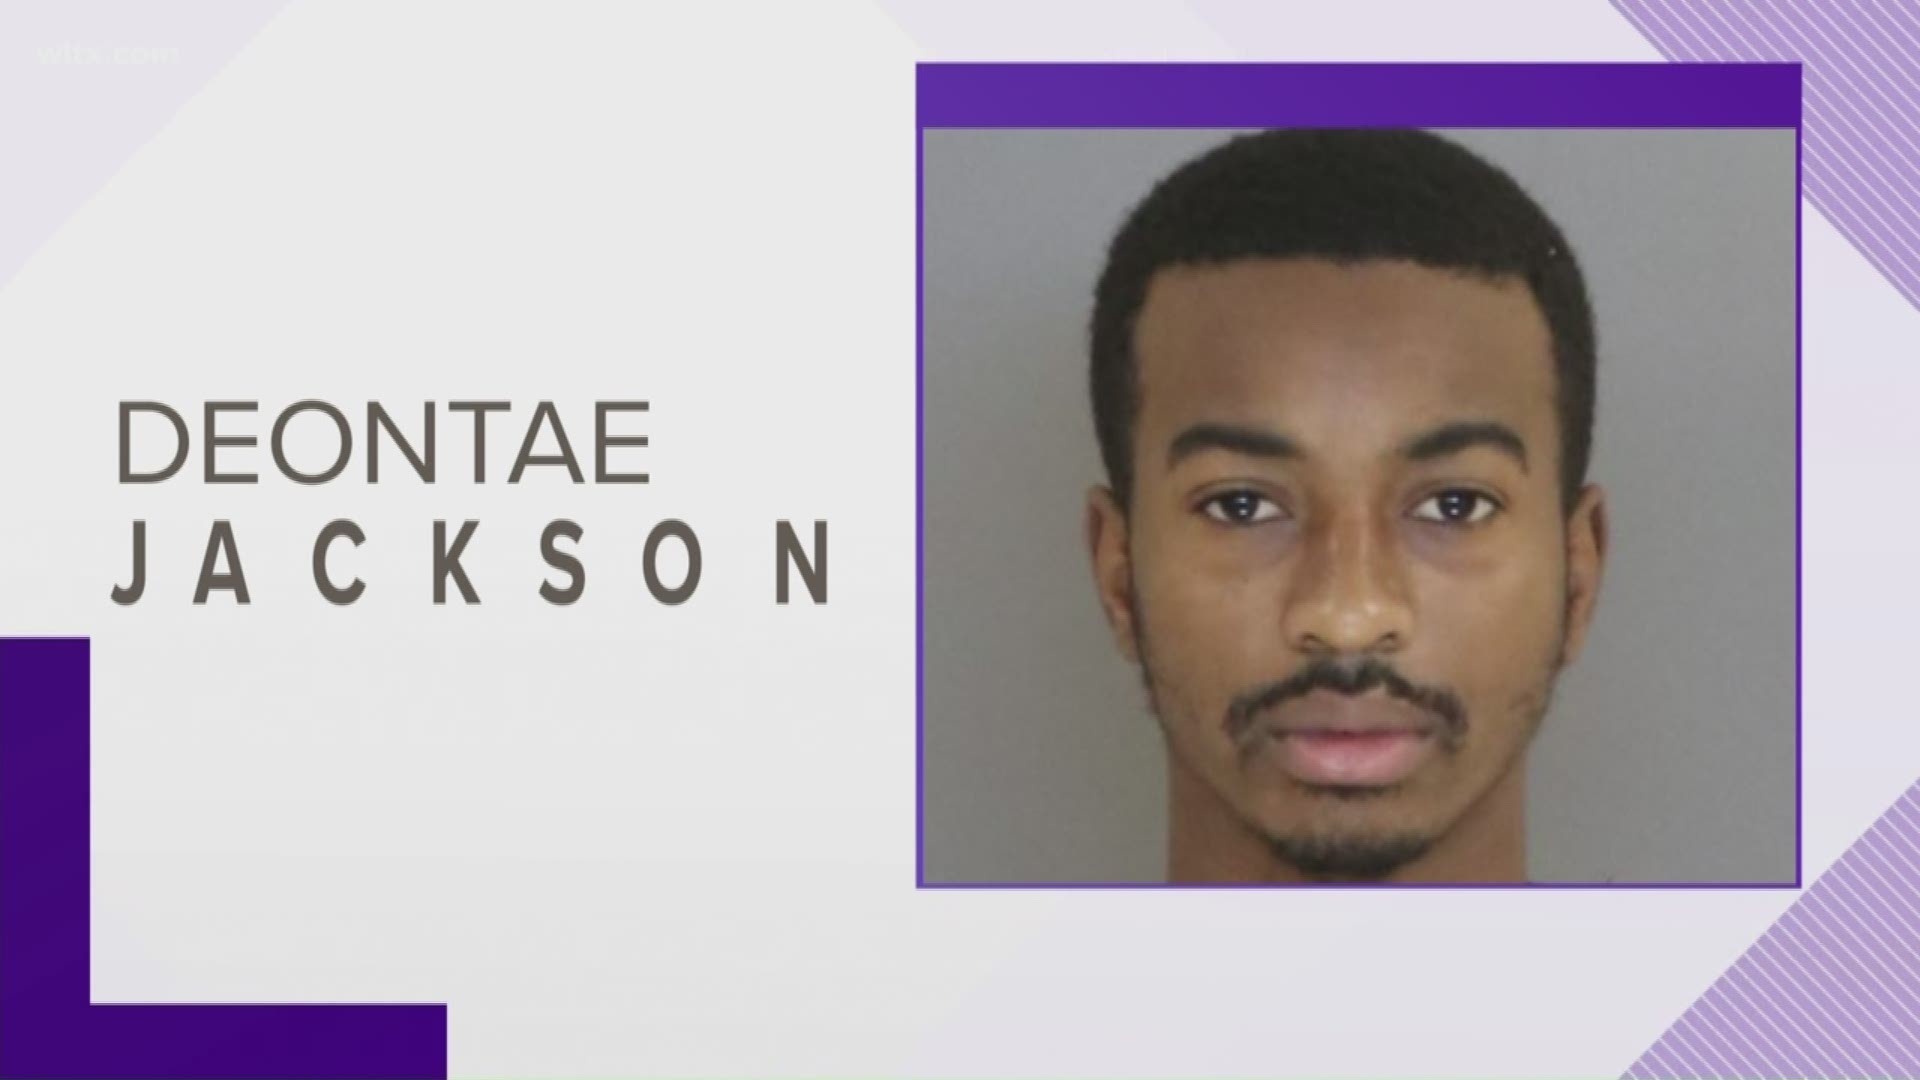 Deontae Jackson, 20 was charged with murder in connection to the death of Montrell Epps.